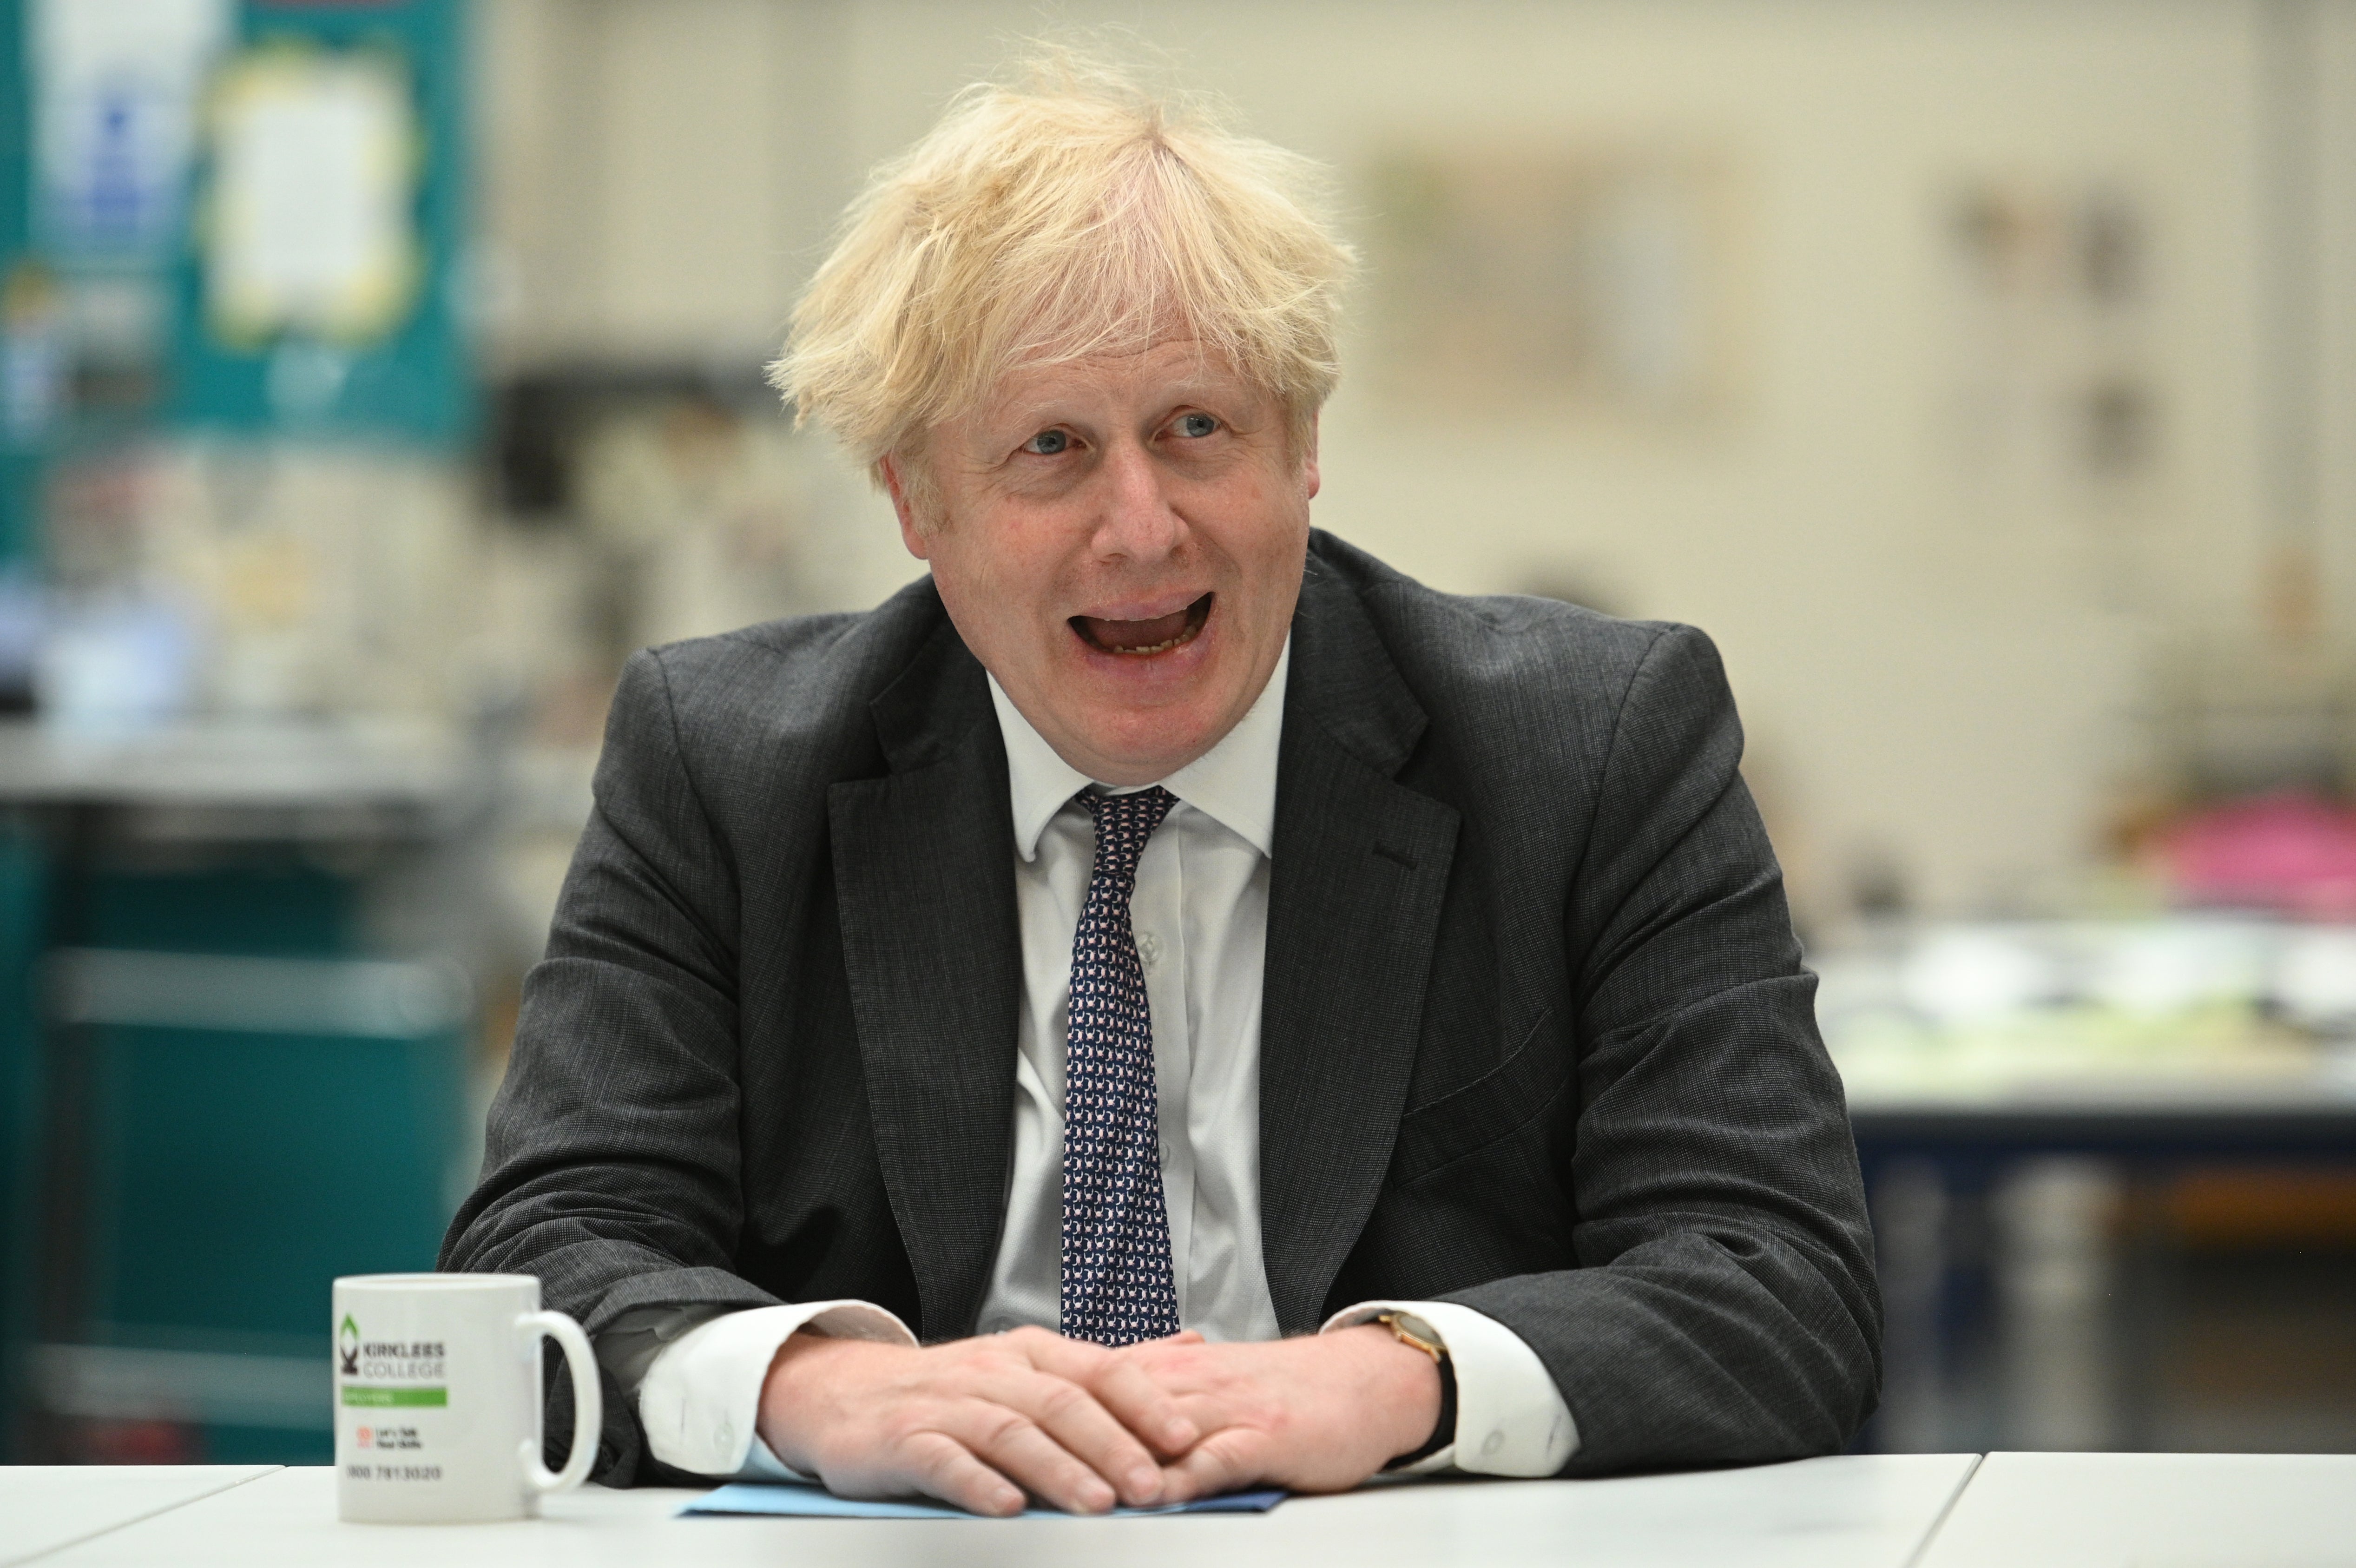 Prime Minister Boris Johnson has promised a ‘levelling up’ agenda in the North of England